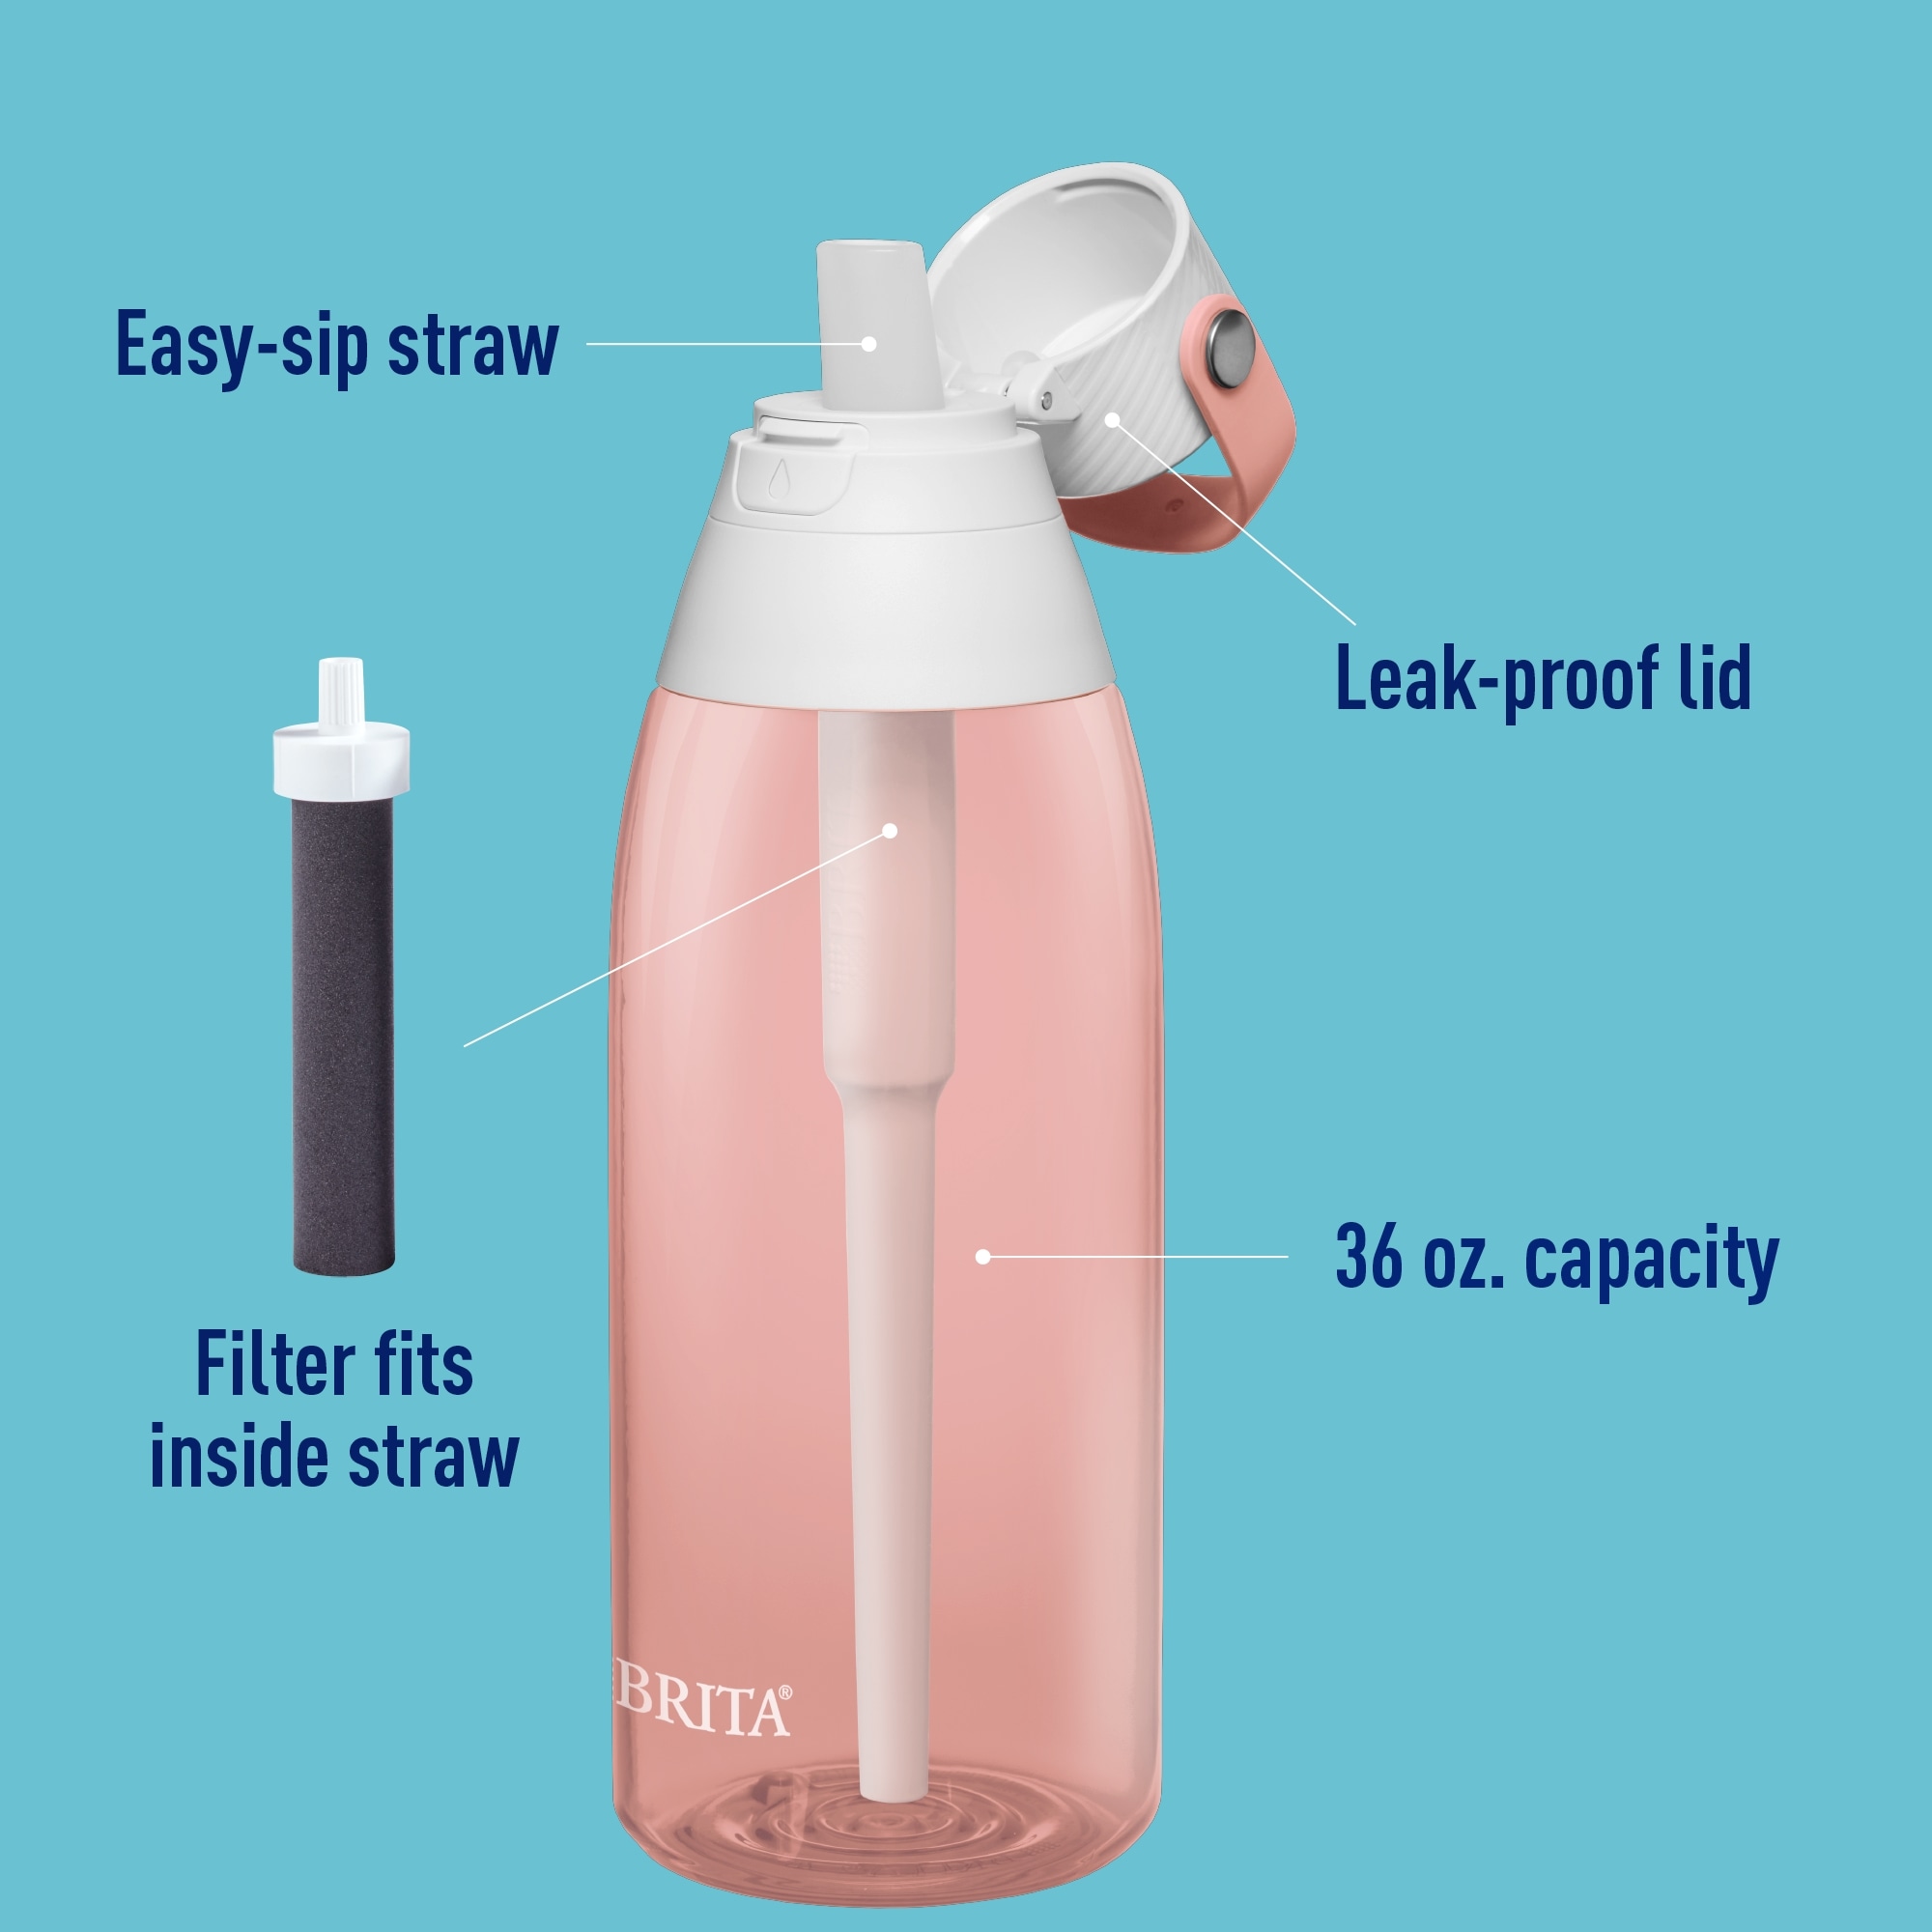 32oz Water Bottle with Time Marker & Straw Lid for Gym,Motivational Fitness Sports Water Jug with Removable Strainer,Dishwasher Safe,Leakproof,Safety